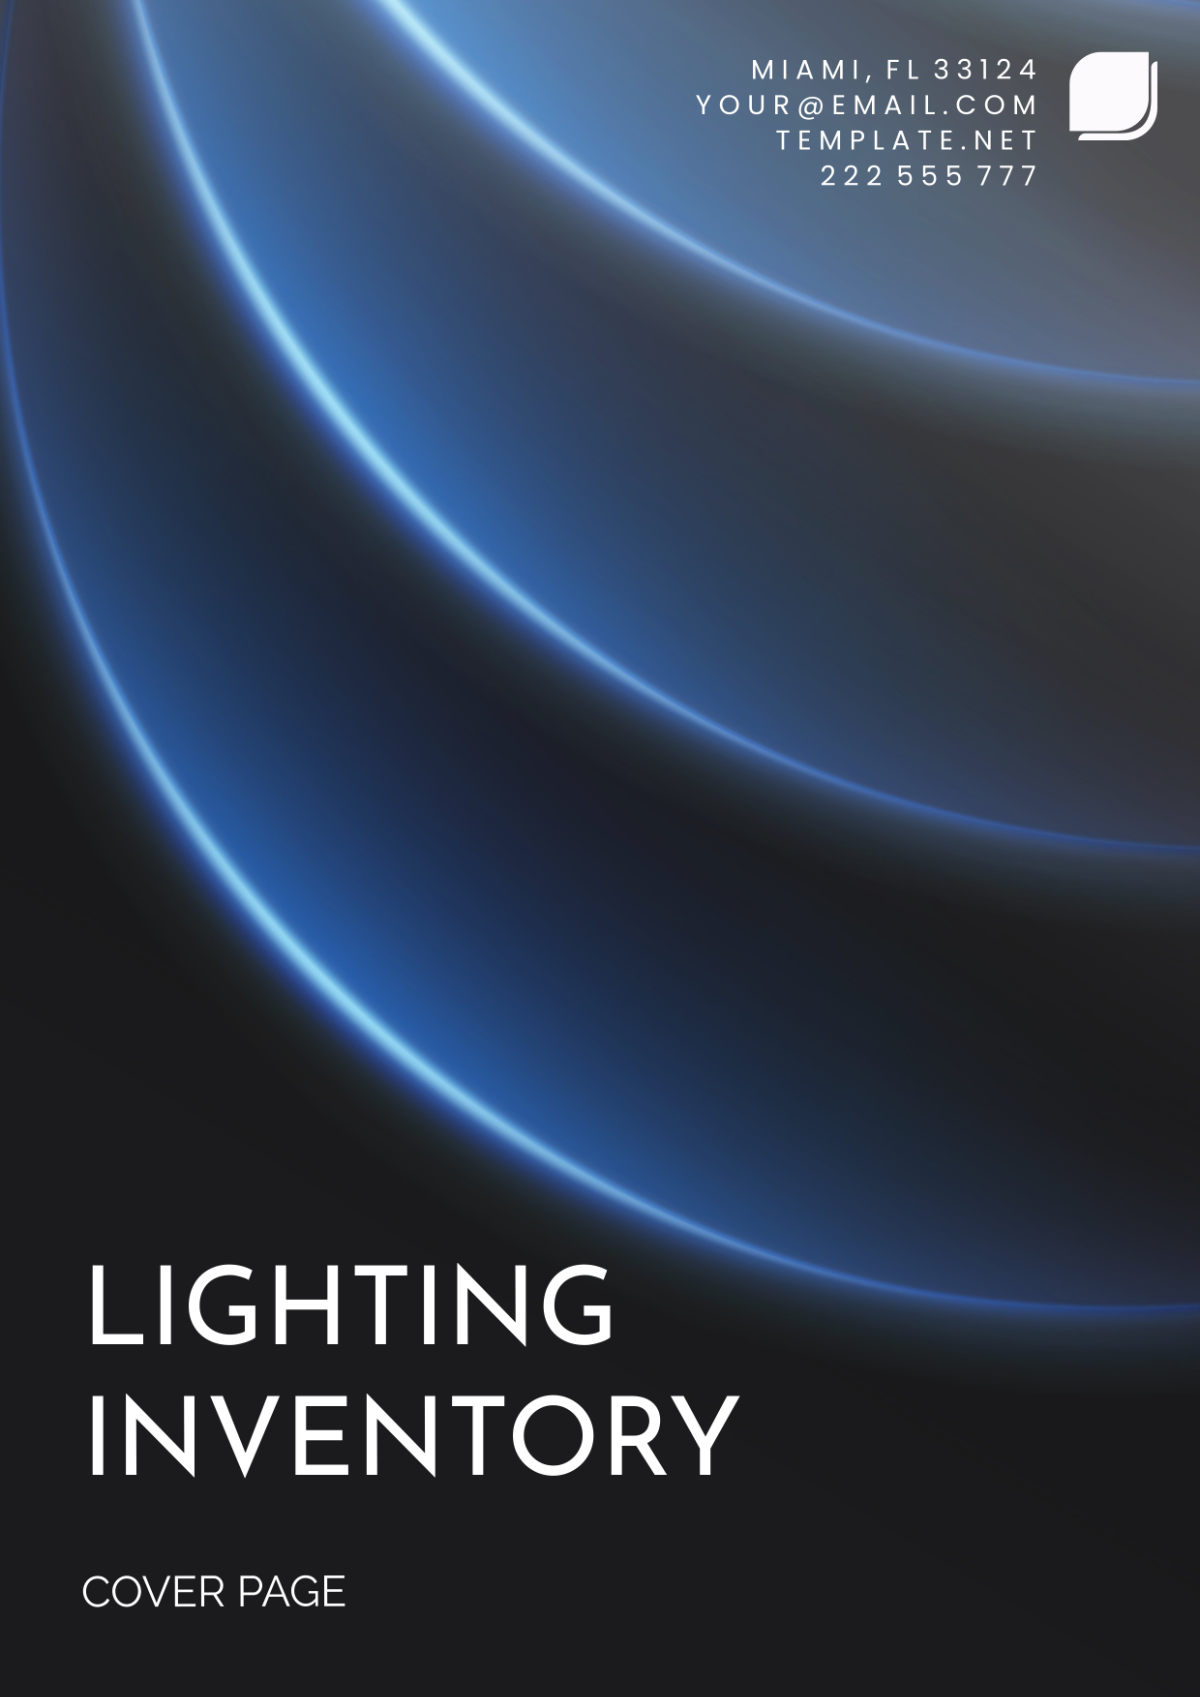 Lighting Inventory Cover Page Template